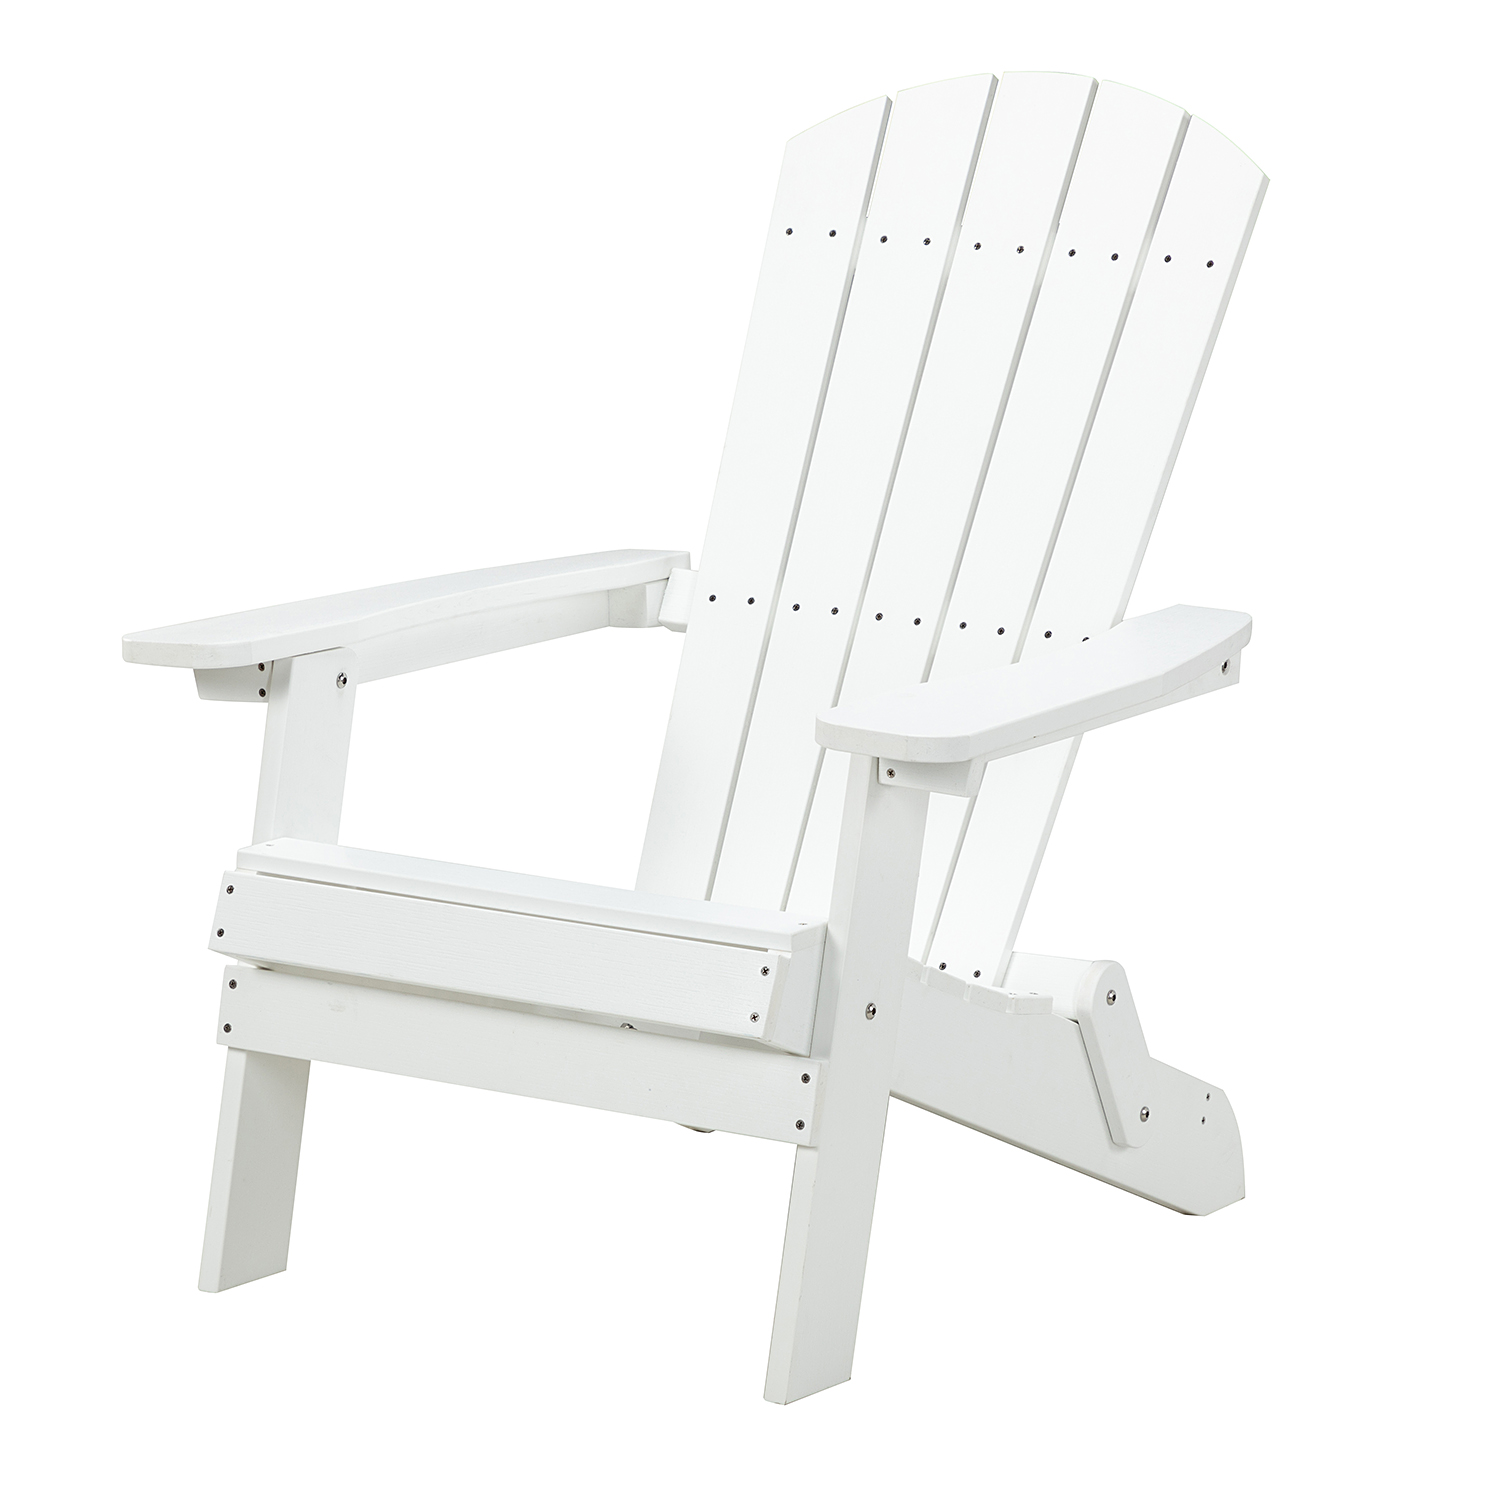 Folding Plastic Chair,Folding All-Weather Patio Chair,High Back Plastic Resin Deck Chair,Painted Weather Resistant Chair for Garden Backyard Porch,Easy to Fold Move & Maintain,Outdoor Furniture,White - image 2 of 7